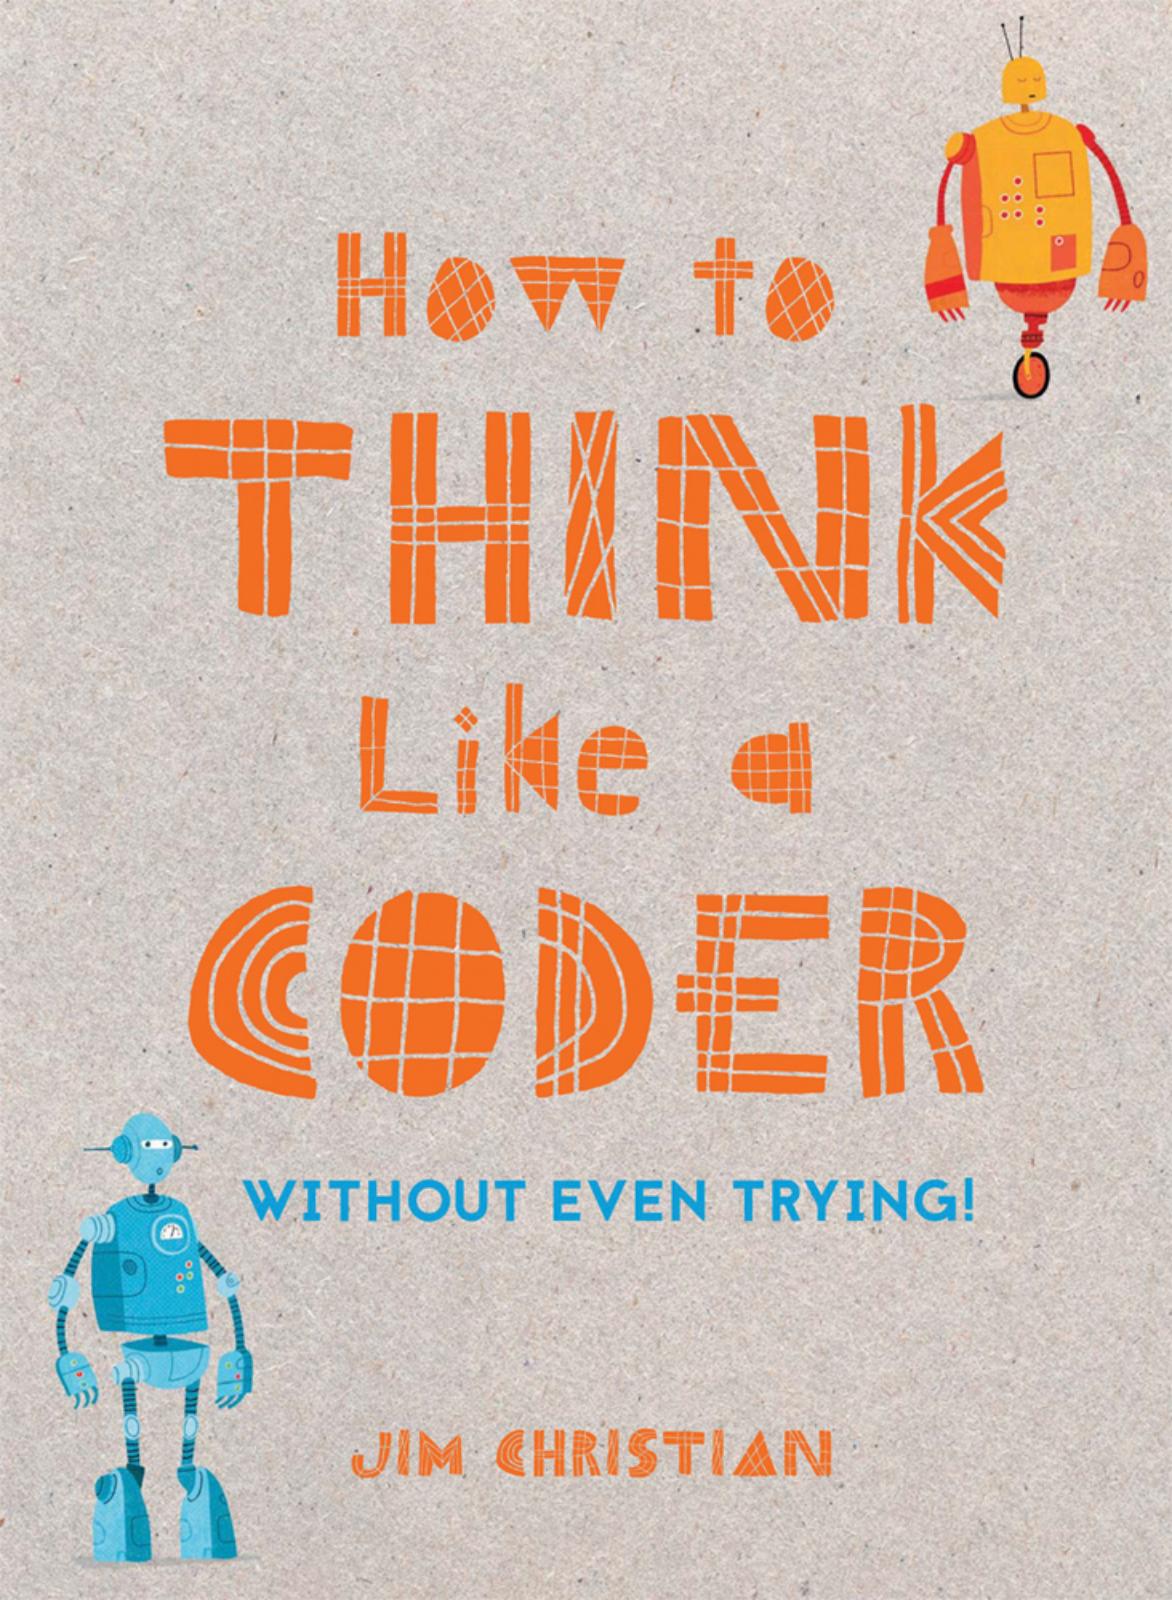 HOW TO THINK LIKE A CODER